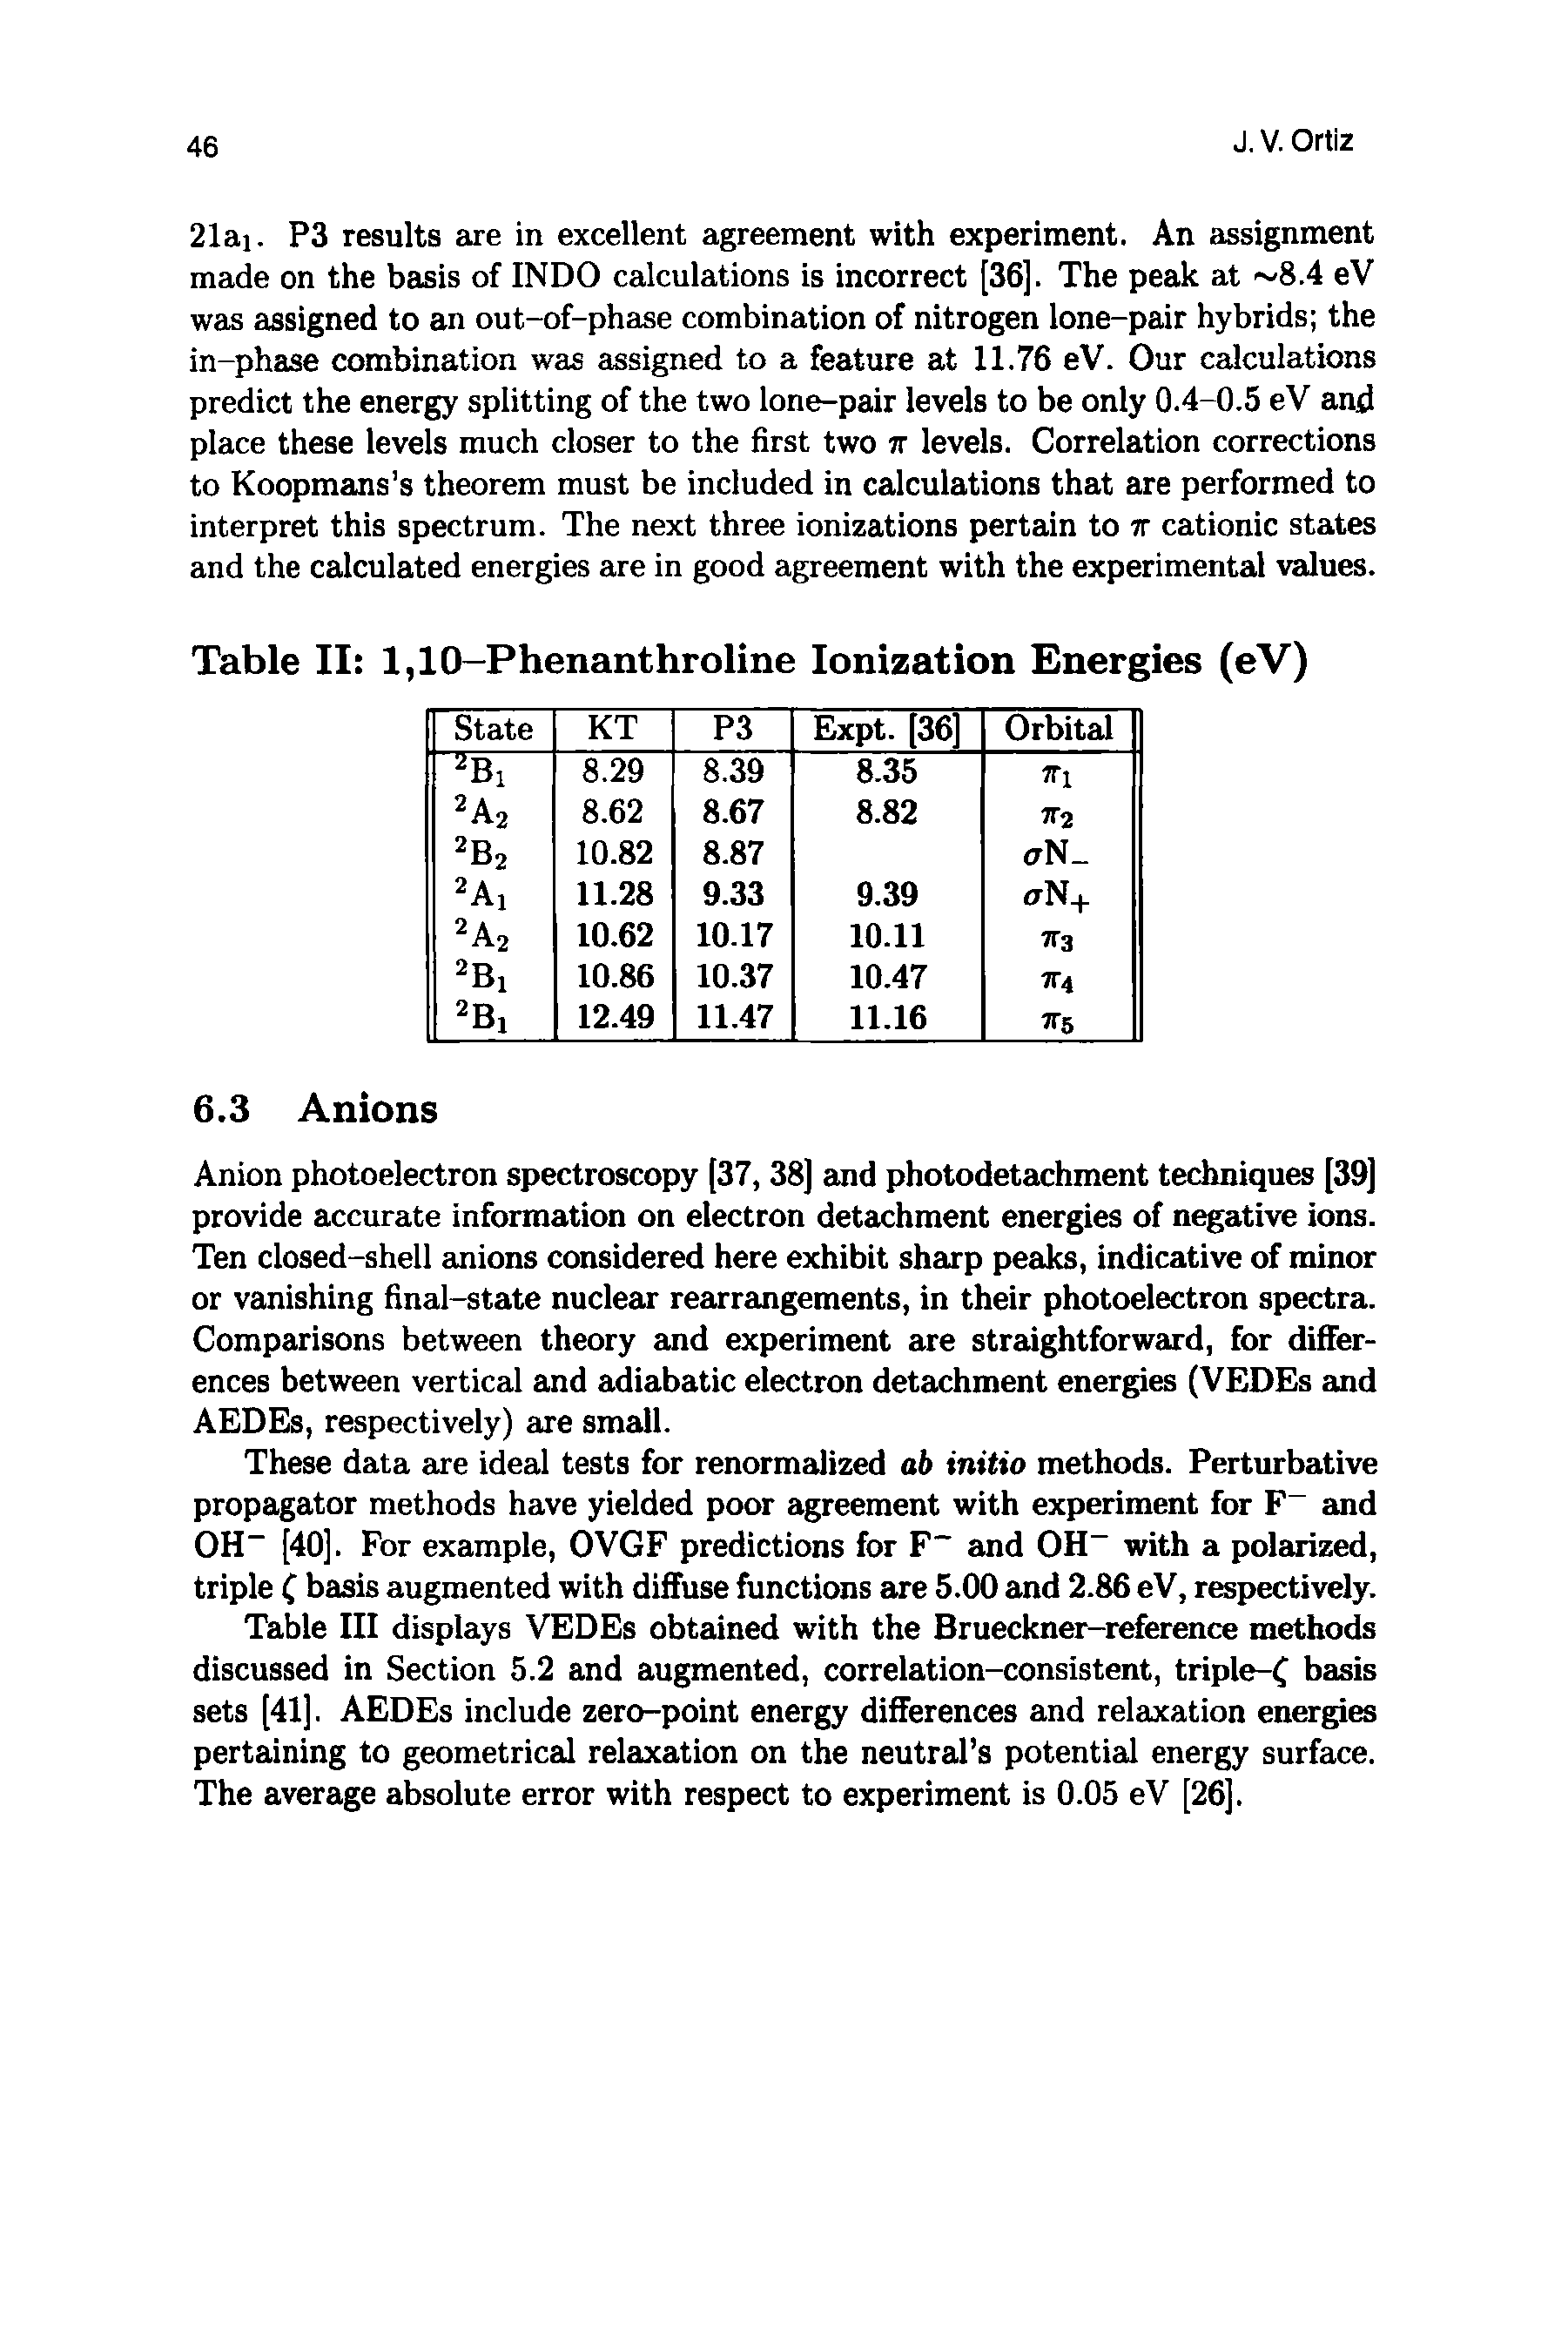 Table III displays VEDEs obtained with the Brueckner-reference methods discussed in Section 5.2 and augmented, correlation-consistent, triple- basis sets [41]. AEDEs include zero-point energy differences and relaxation energies pertaining to geometrical relaxation on the neutral s potential energy surface. The average absolute error with respect to experiment is 0.05 eV [26].